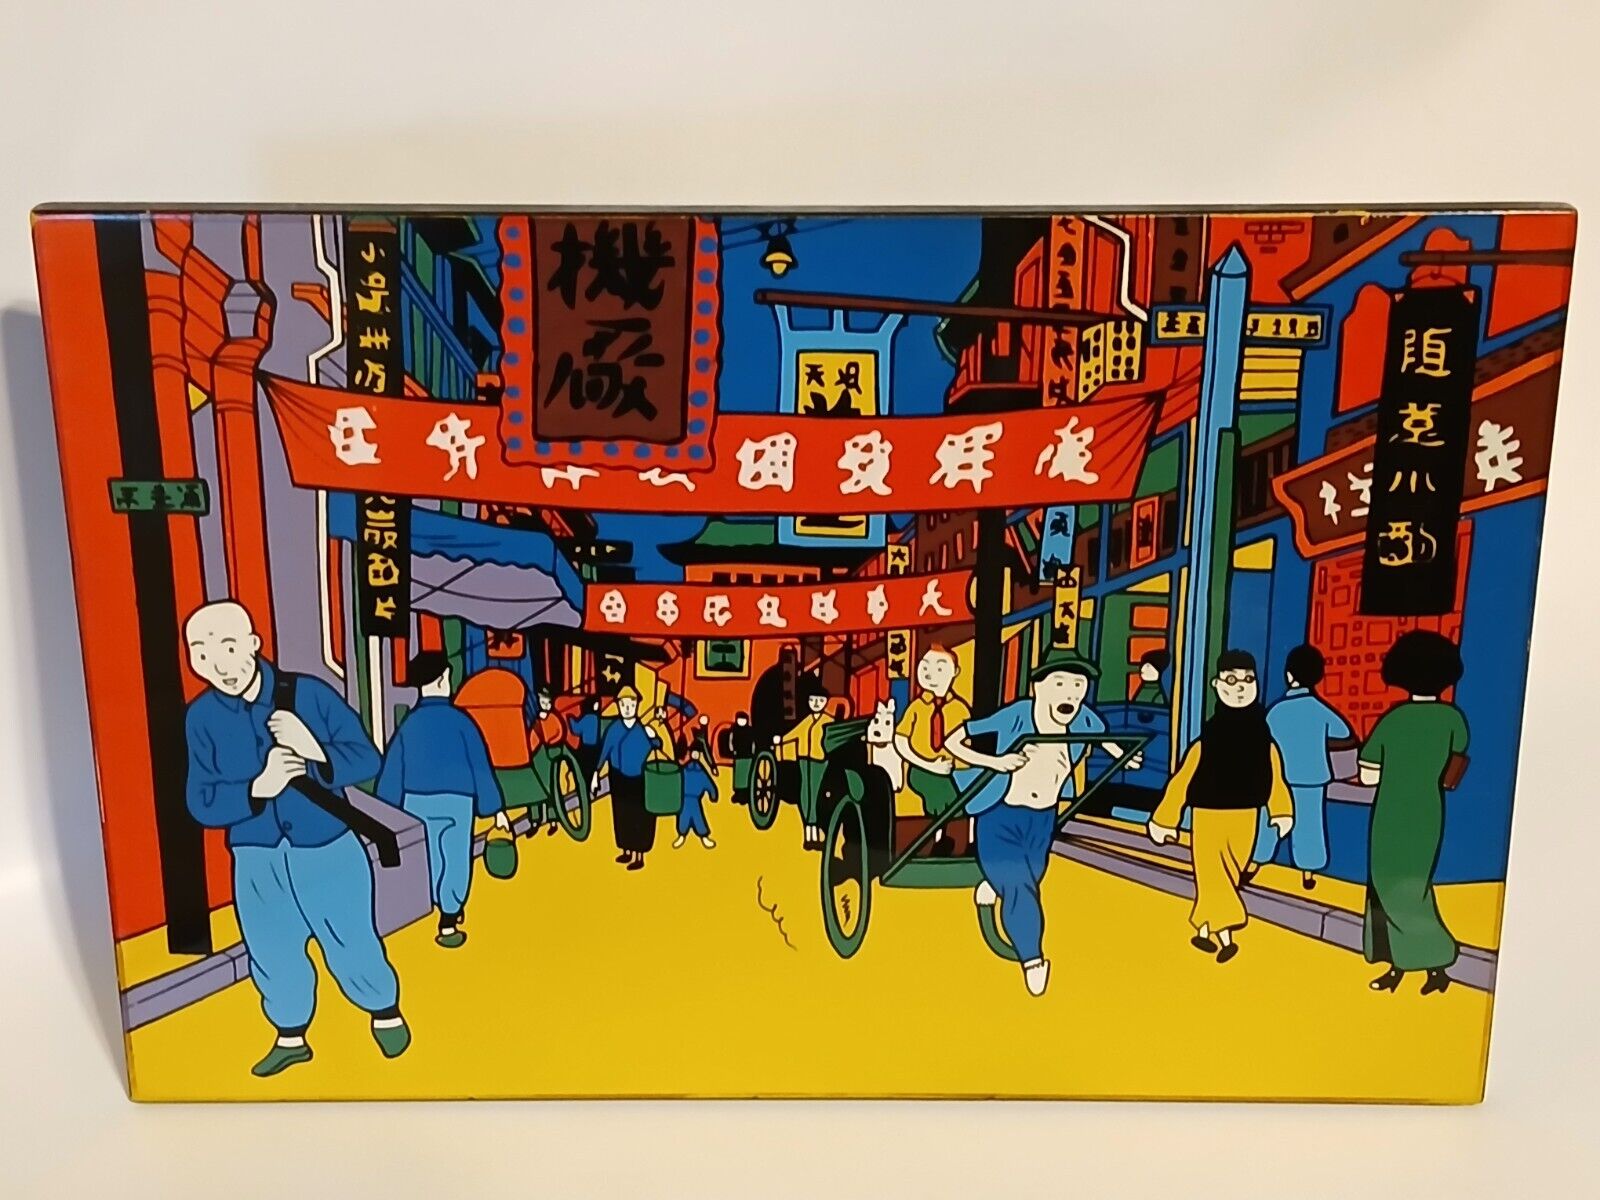 Adventures of TINTIN Chinatown Scene on a Rickshaw Lacquer Sign Rare Vintage